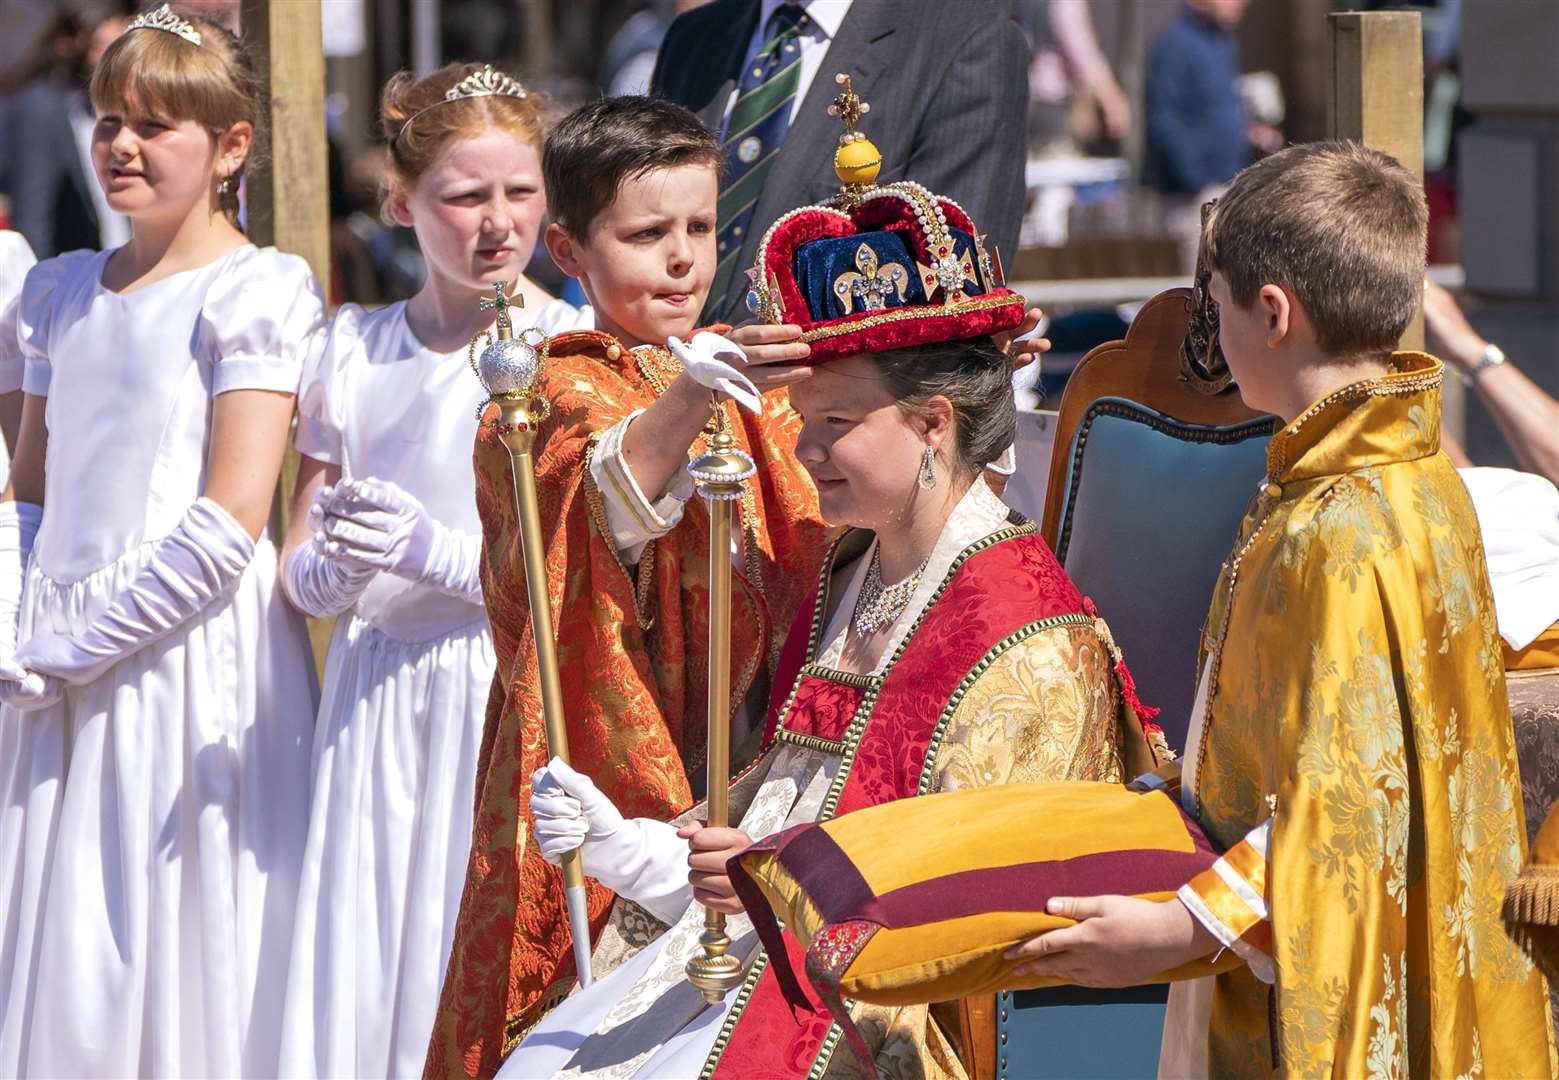 In the Scottish borders, a re-enactment of the Queen’s Coronation Day was acted out by local Cubs, Scouts and Guides in Kelso with Ben Redpath playing the part of the Archbishop of Canterbury and Susannah Ayling as the Queen (Jane Barlow/PA)